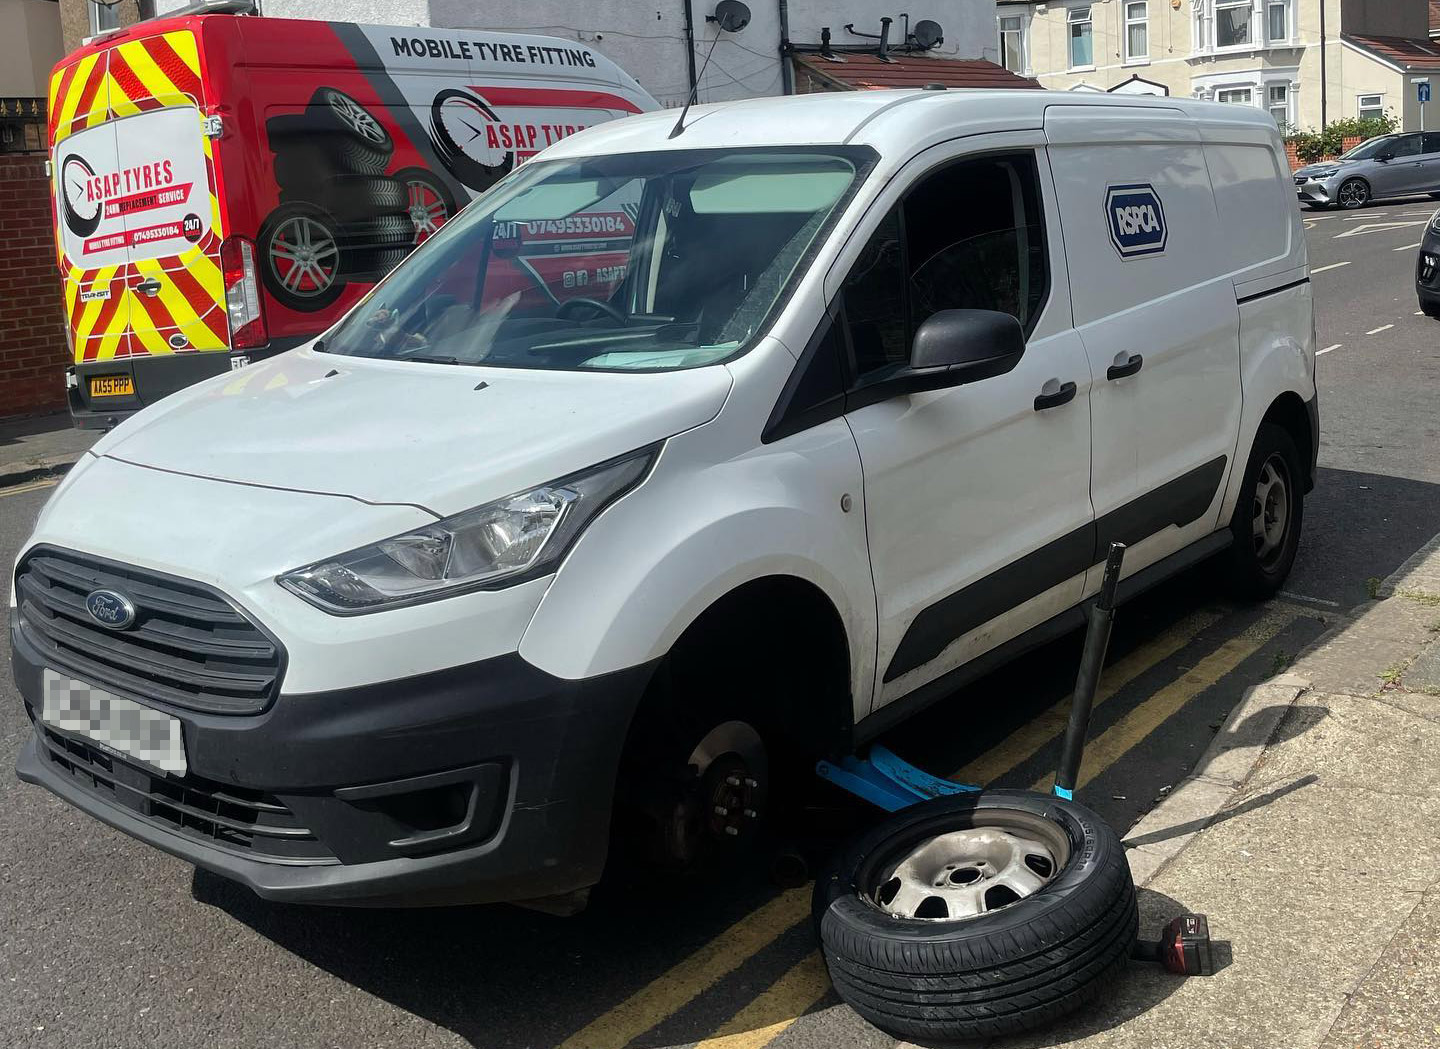 Mobile Tyre Fitters Walthamstow Village